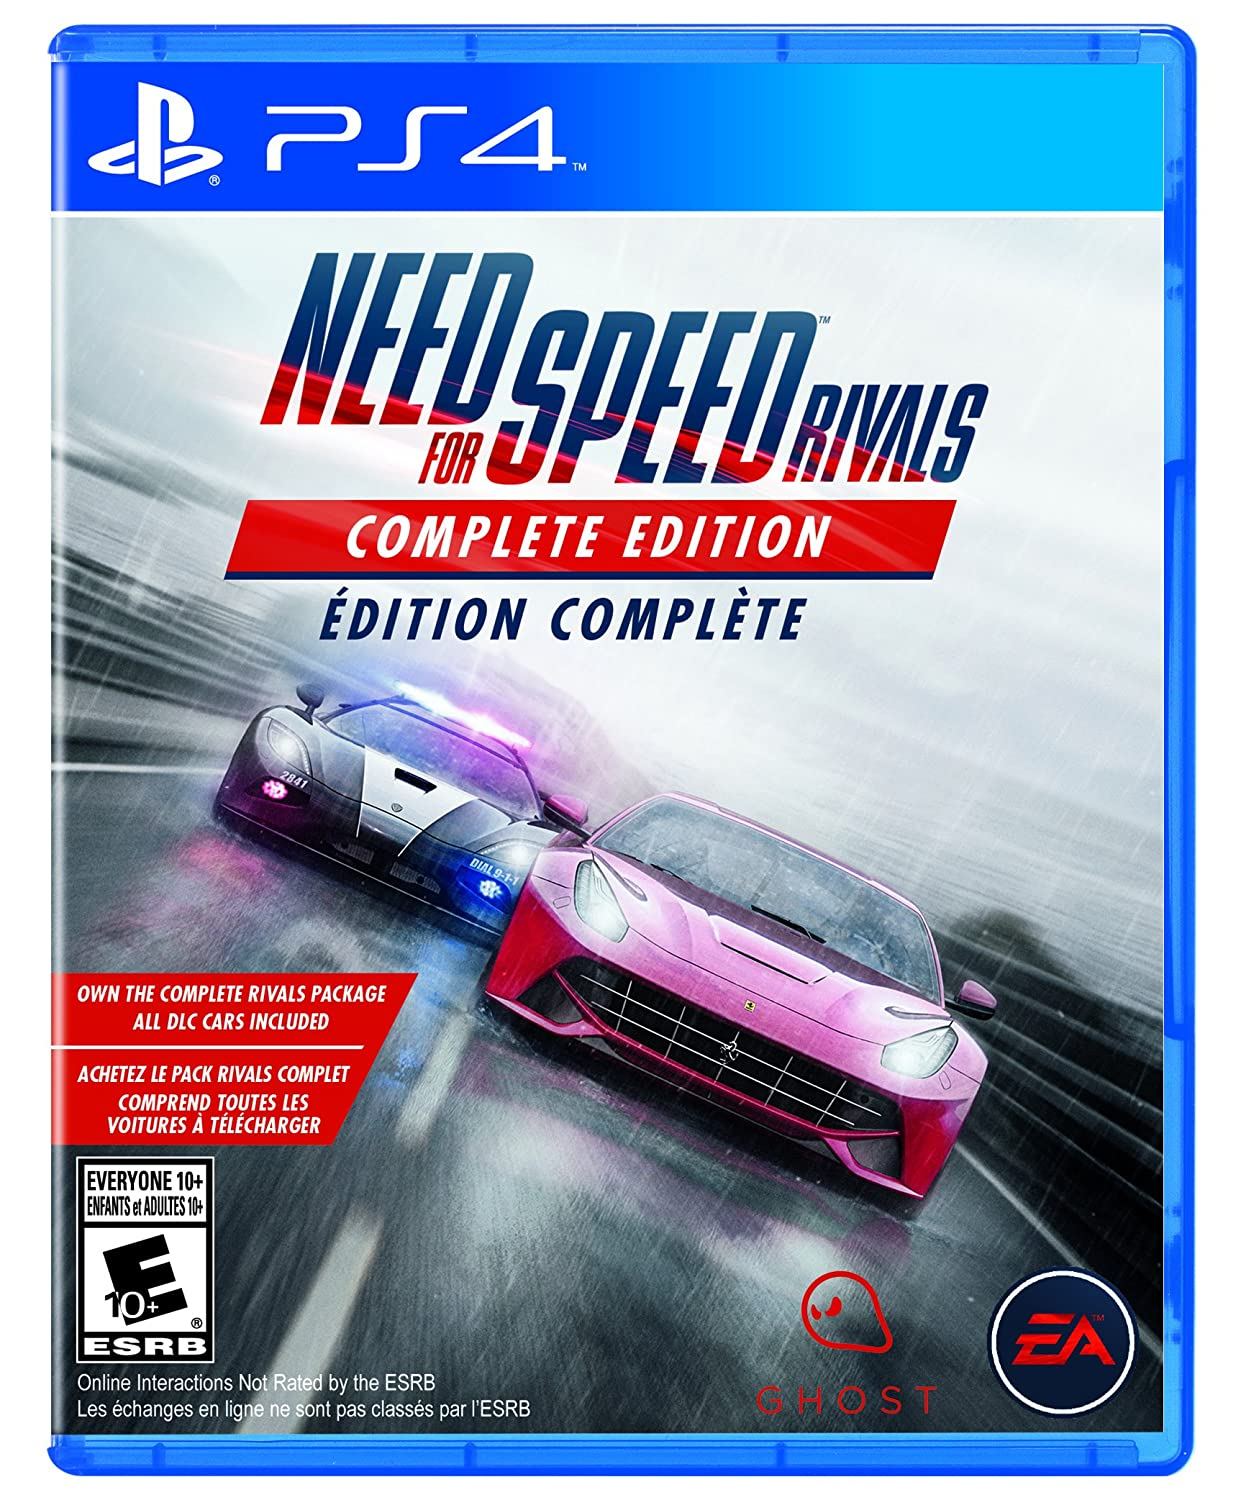 for　PlayStation　Complete　Need　Rivals　Speed:　for　Edition